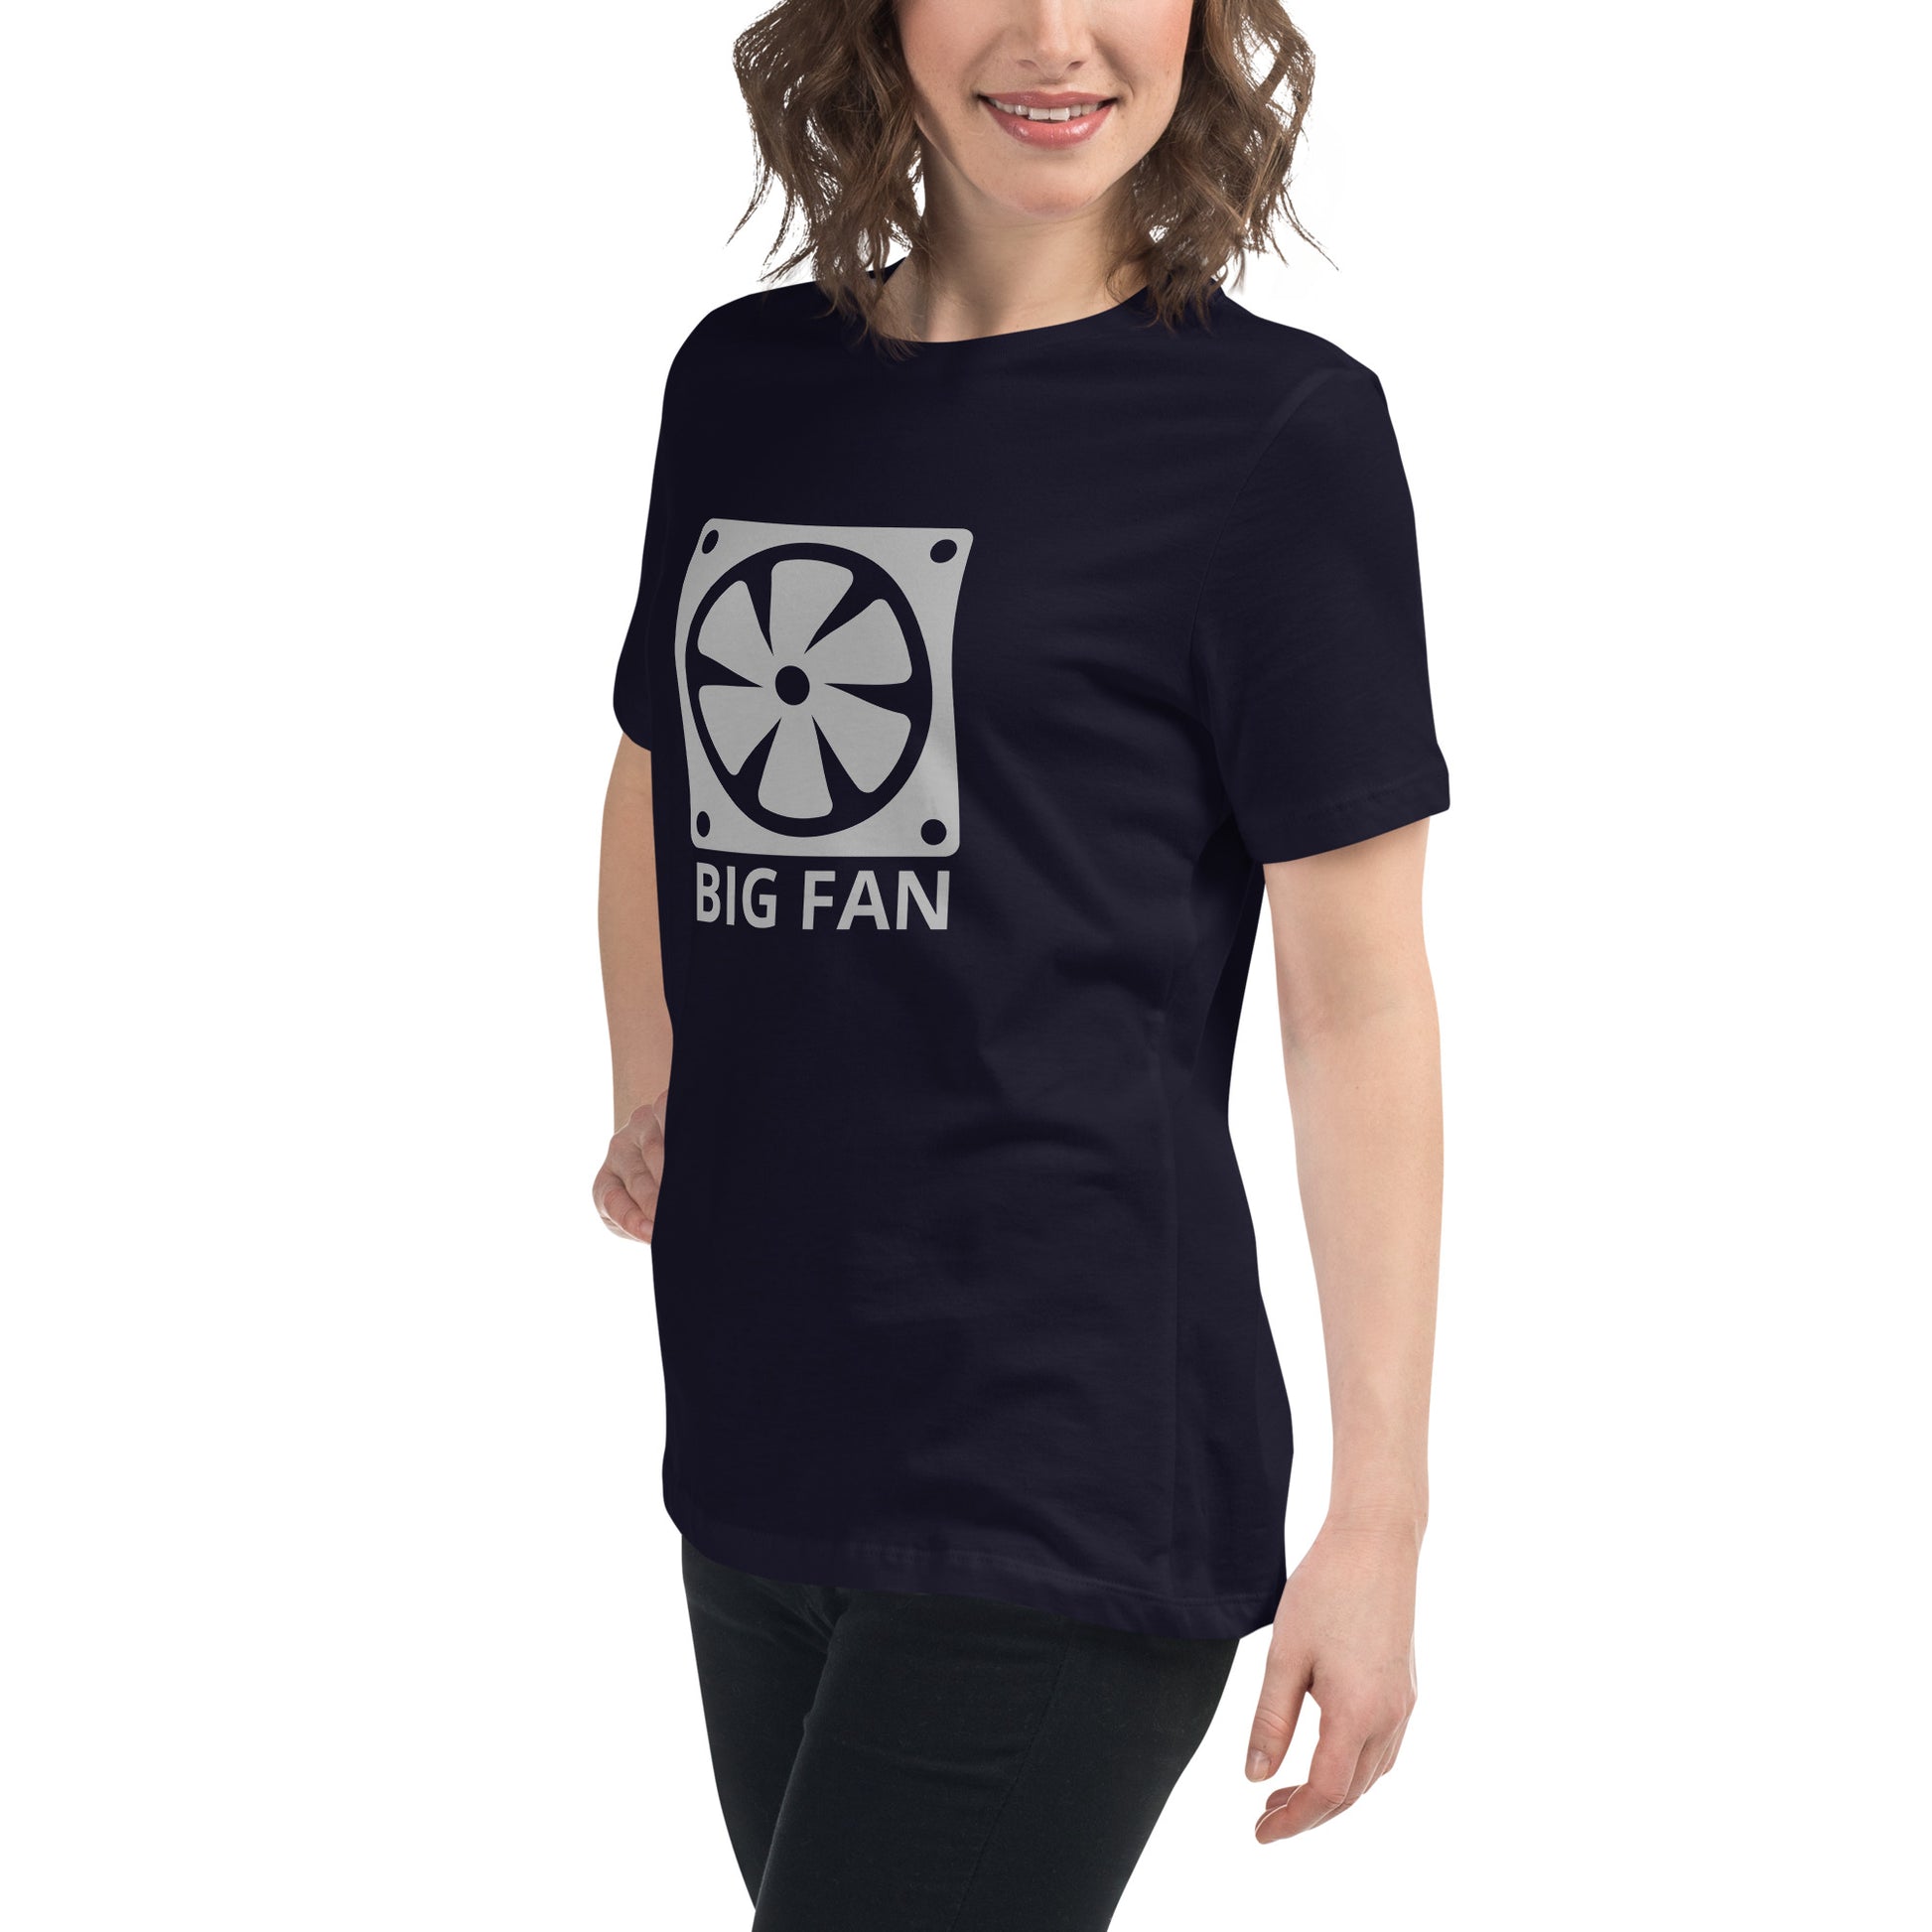 Women with navy blue t-shirt with image of a big computer fan and the text "BIG FAN"